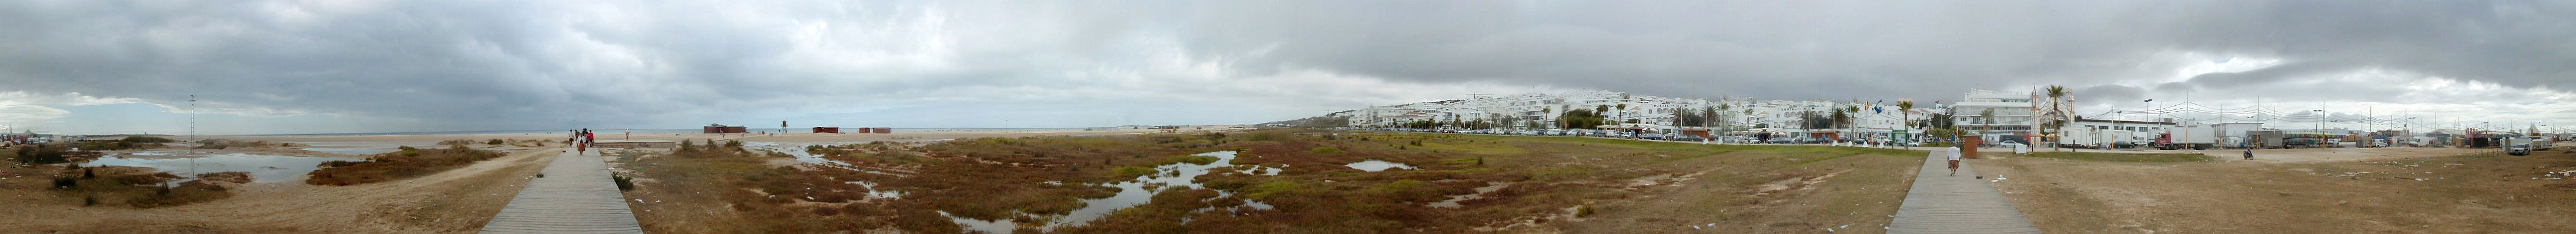 Panoramic of Conil de la Frontera and its beach on a cloudy early spring afternoon, Costa de la Luz